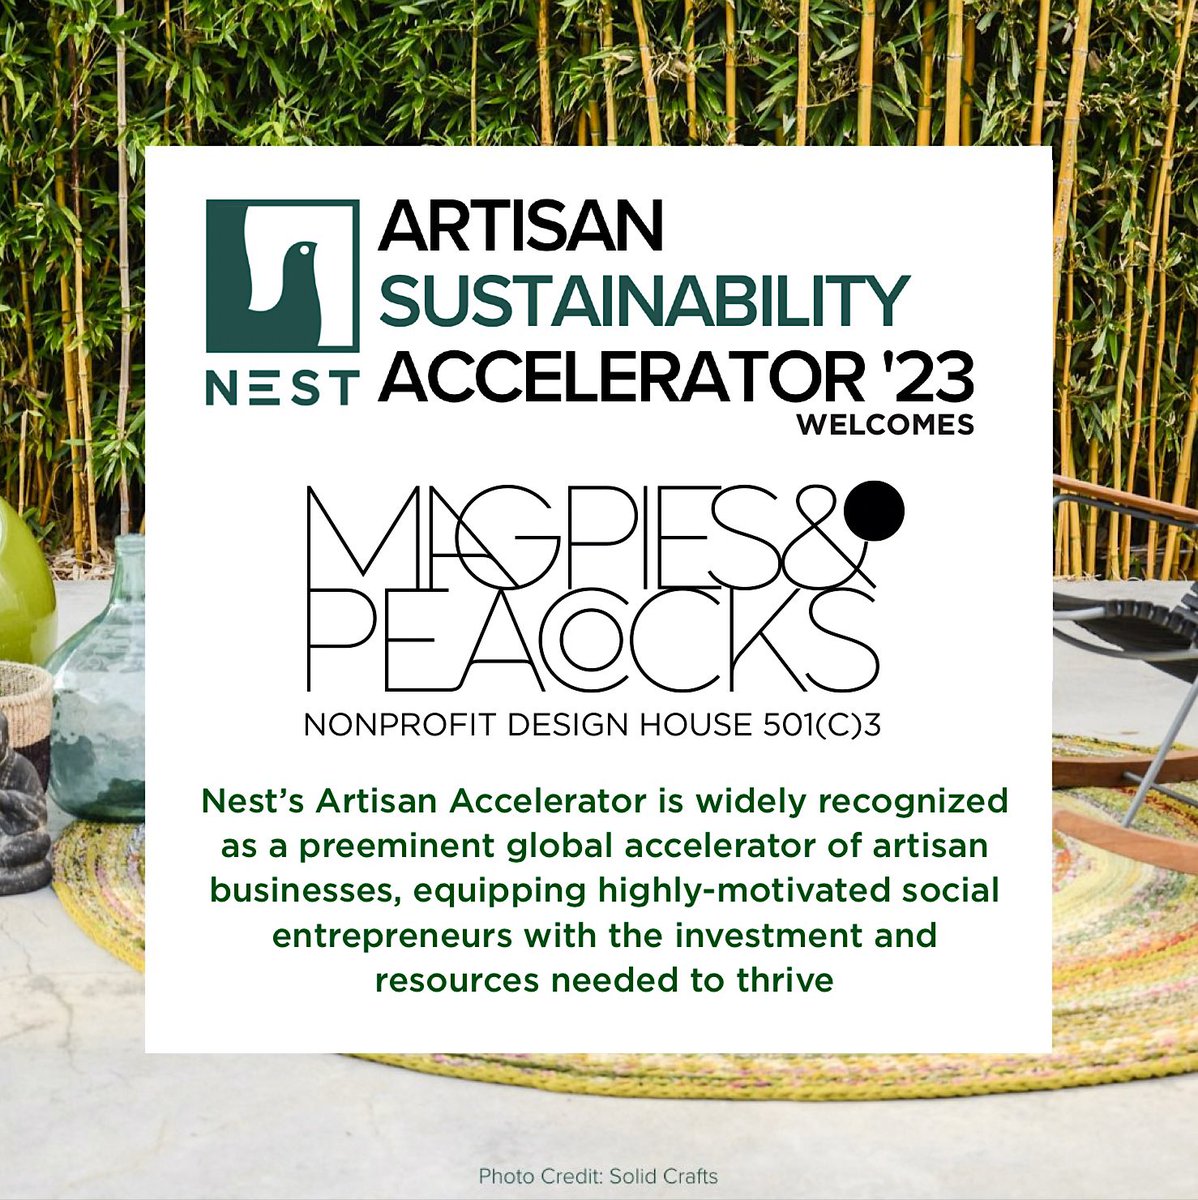 Sustainable Nesting: We’ve got news! We’re excited to share that Magpies & Peacocks 501(c)3 Non-Profit Design House has been selected to participate in @buildanest’s 2023 Artisan Sustainability Accelerator. This will be a great opportunity for our business ❤️🌎♻️.